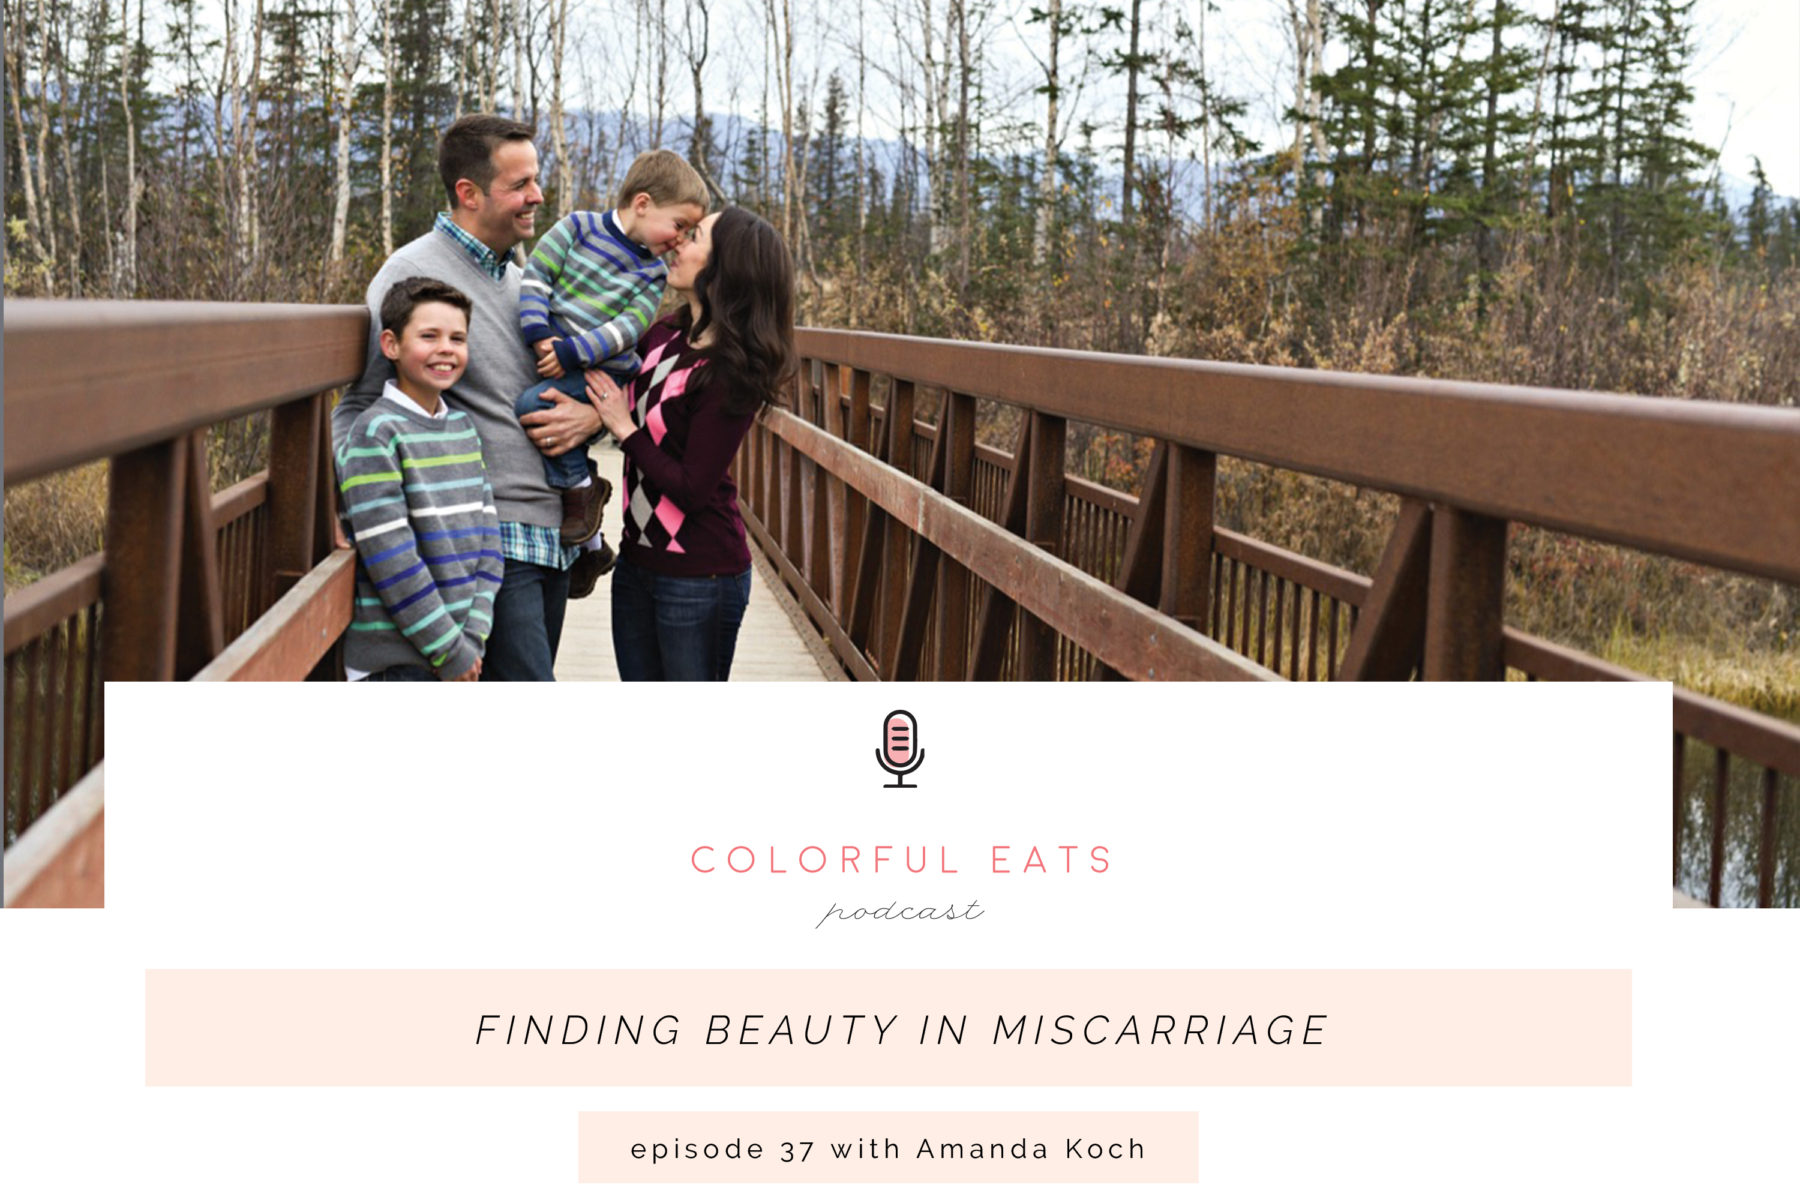 Colorful Eats Podcast Episode 37: Finding Beauty in Miscarriage with Amanda Koch